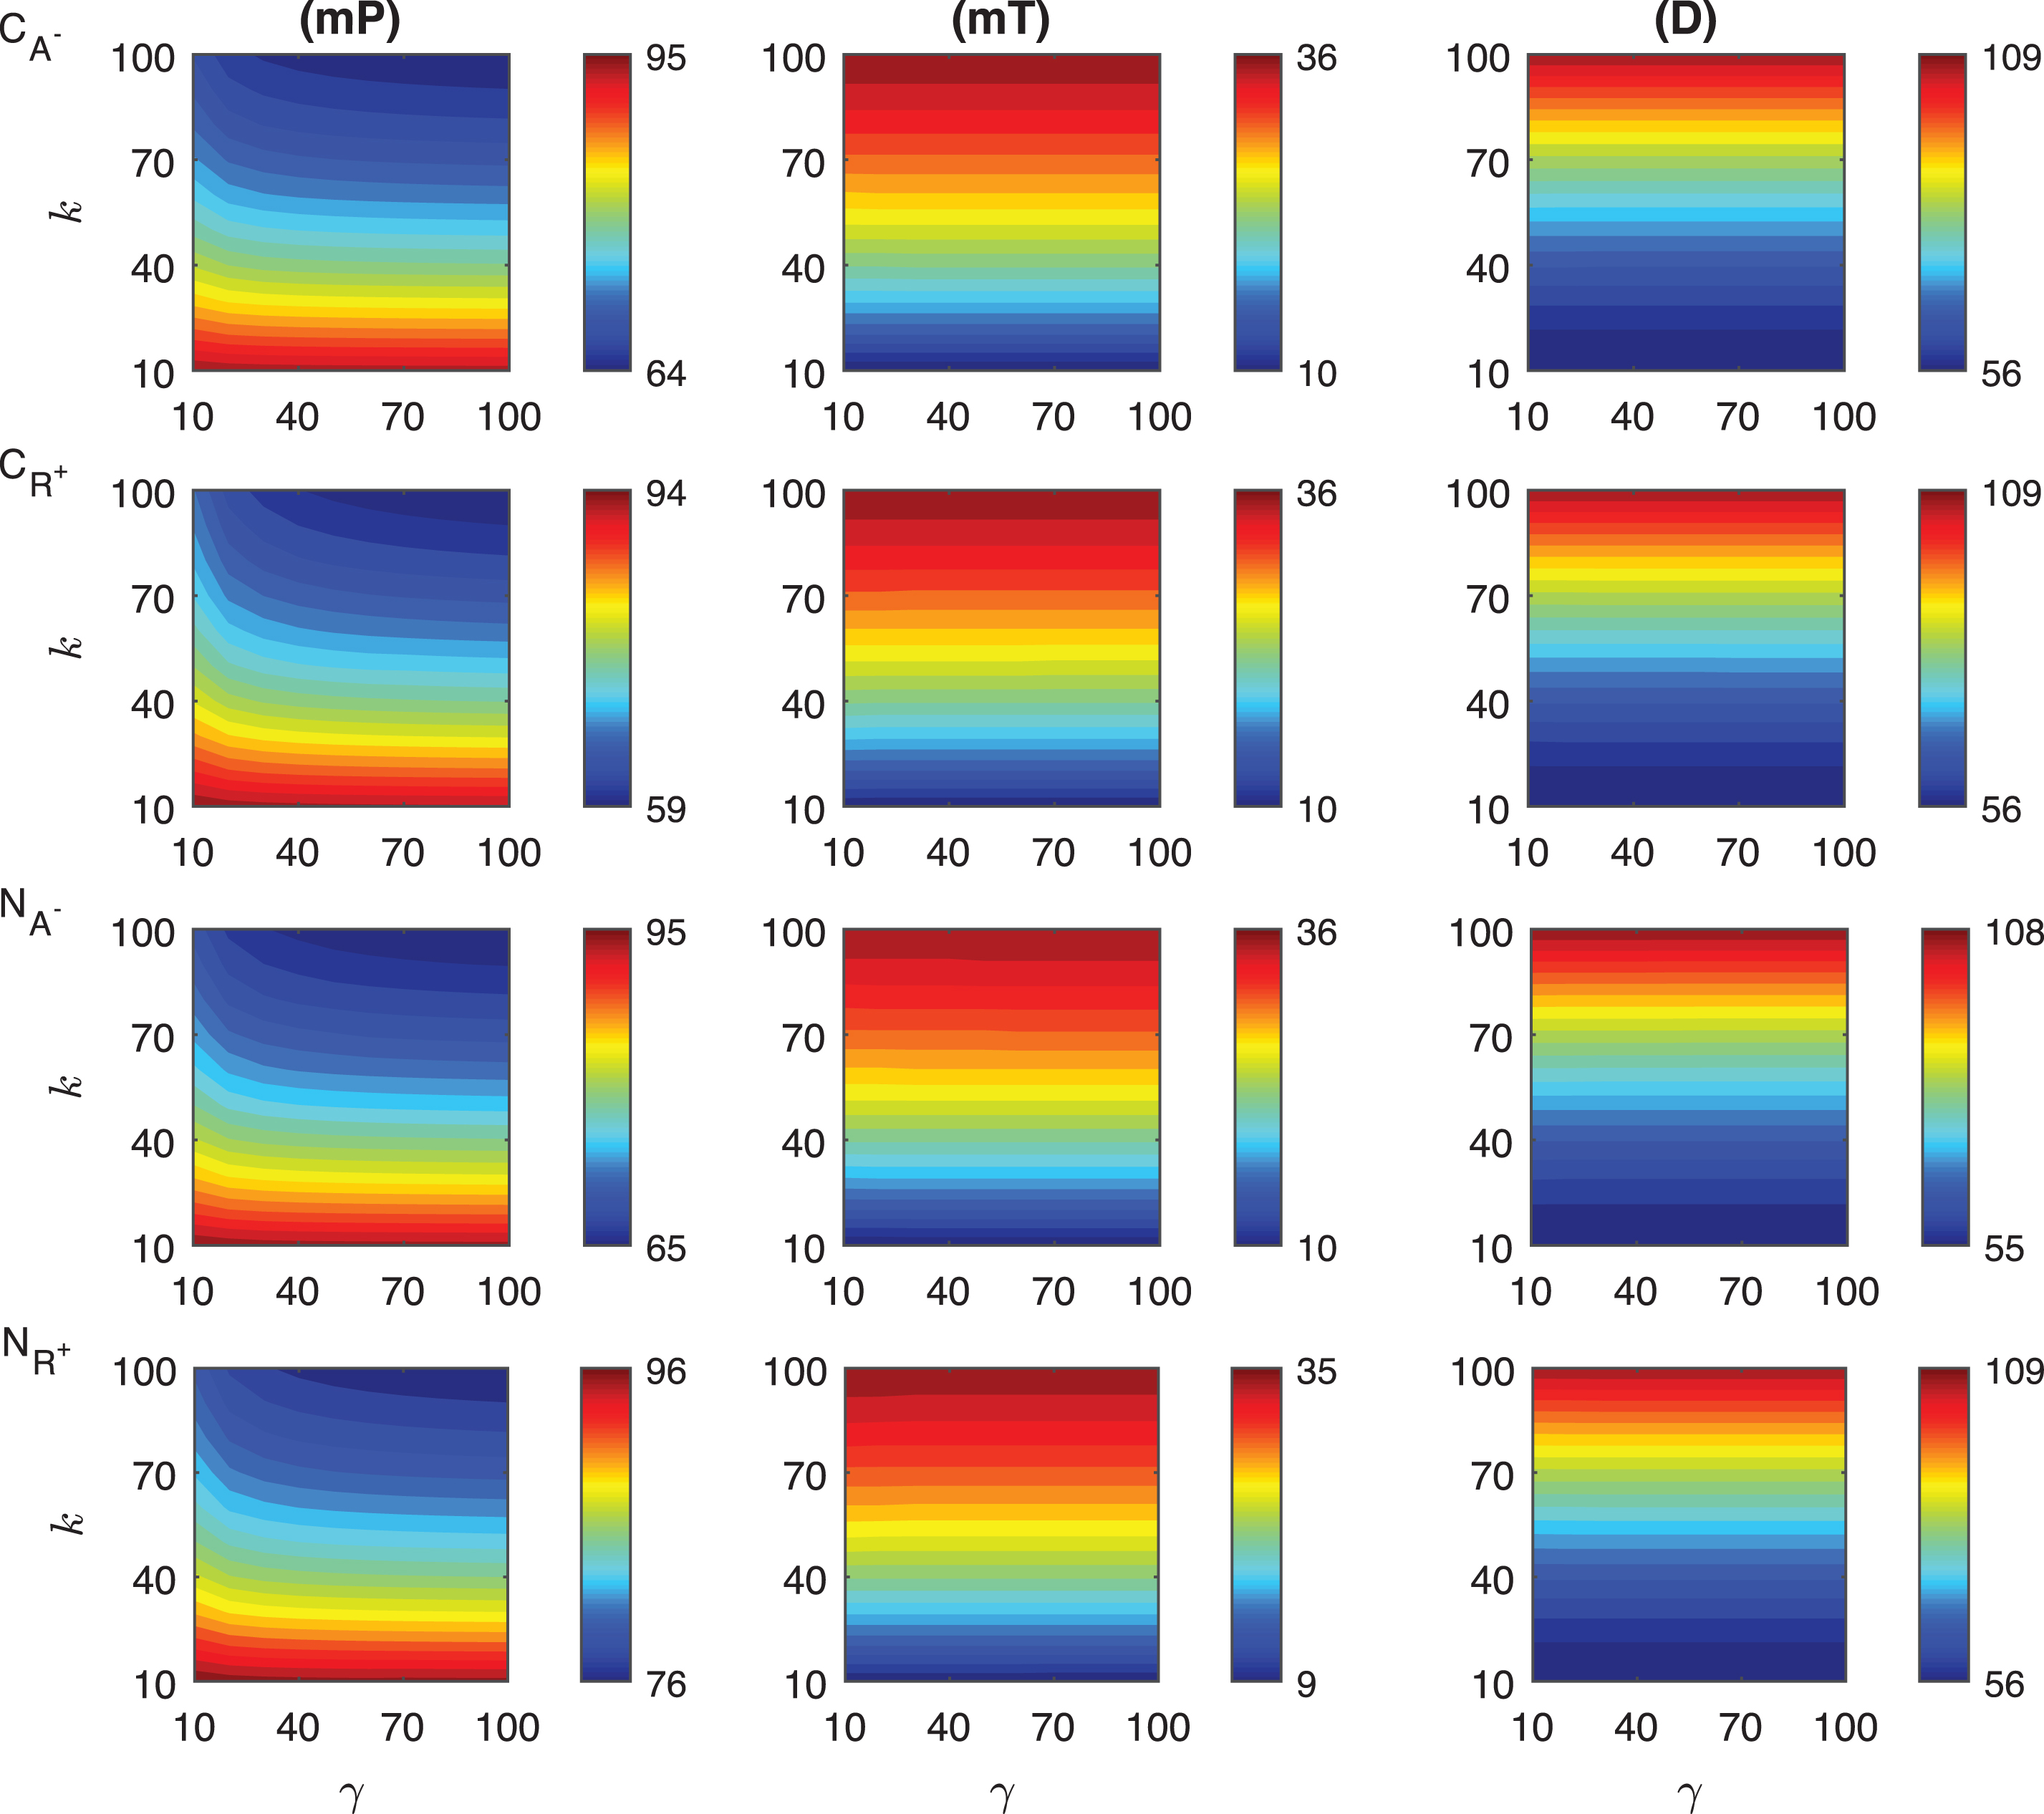 Heat maps for the comparison of three metrics (mid-protein level mP, time to reach mid-protein level mT and duration D) describing the dynamics of competitive (CA−, CR+) and noncompetitive (NA−, NR+) inhibition mechanisms. In these simulations, the signal amplitude γ and persistency k range from a 10-fold to a 100-fold change when ro = 0.01. All the other parameters were held constant at their values listed in Section 3.